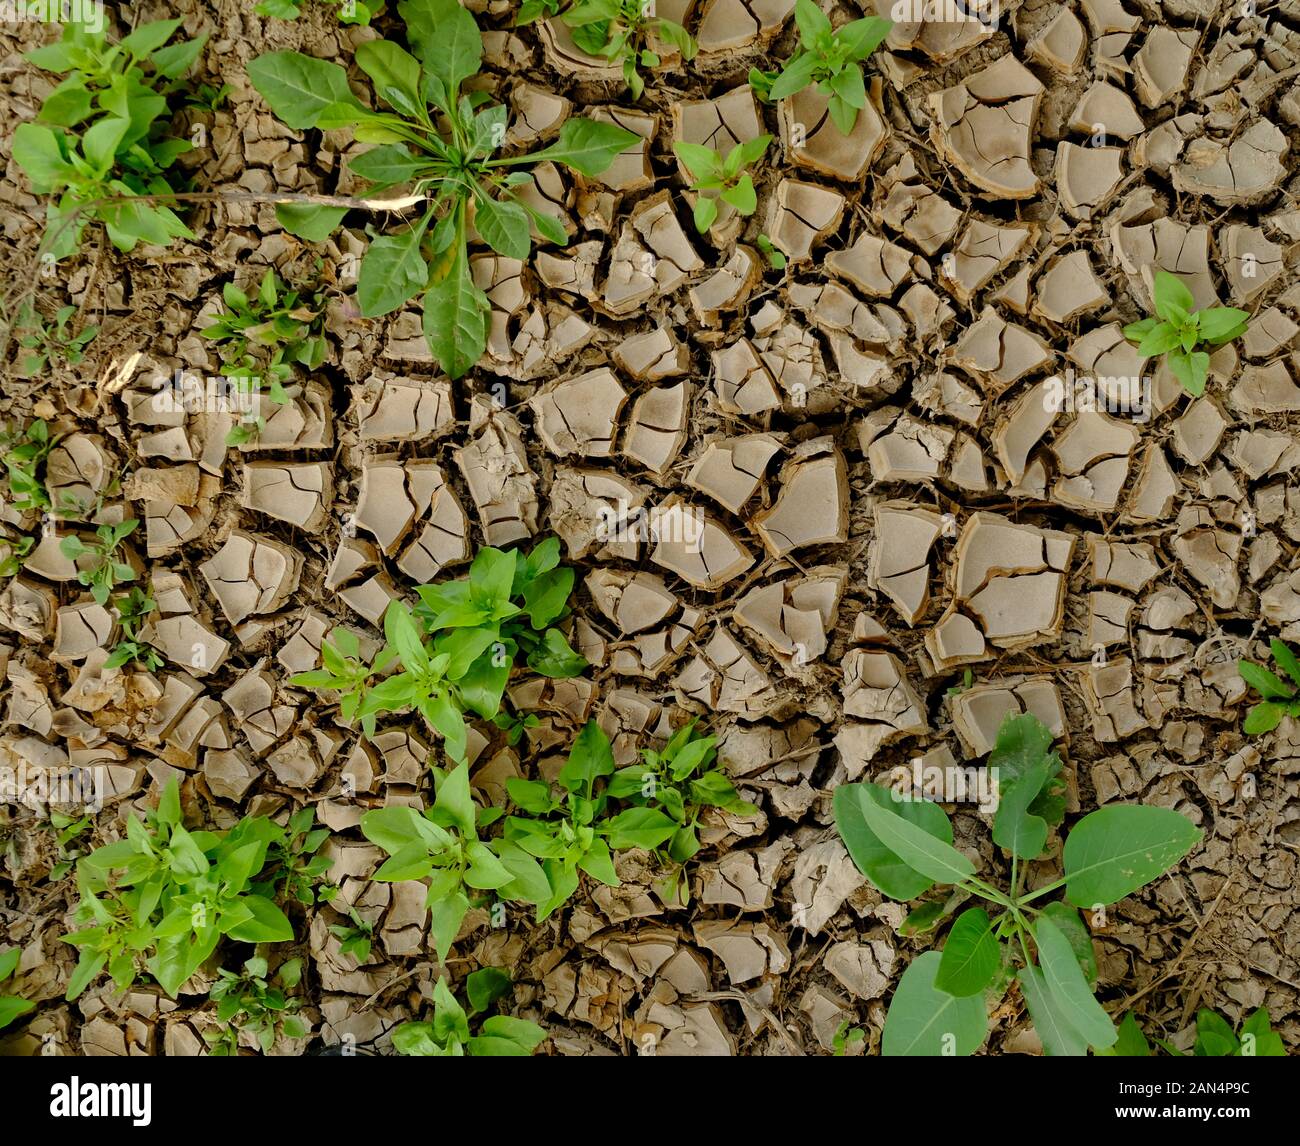 Dry and broken soil surface made of light brown muddy fluvial material with new young green plants growing out of the cracks. Stock Photo